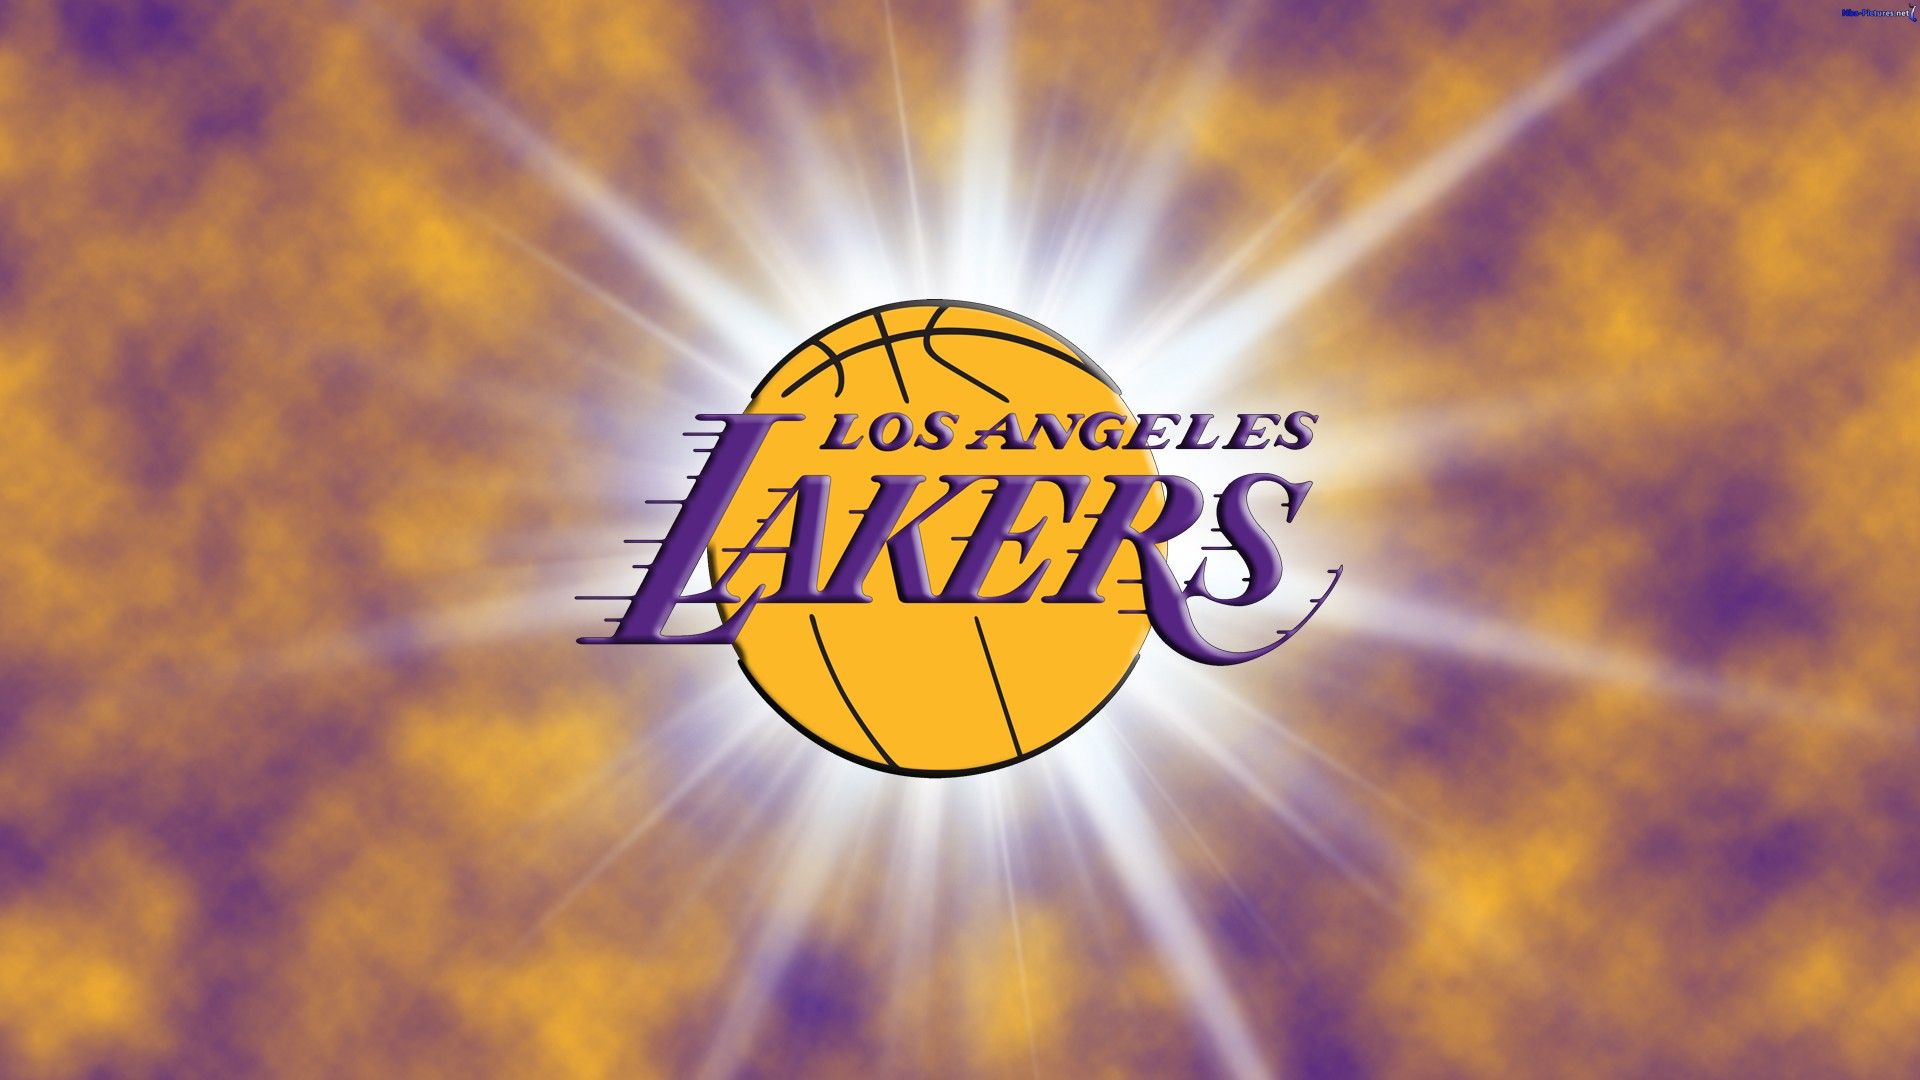 Most Popular Los Angeles Lakers Wallpapers Full Hd - Los Angeles Lakers Background - HD Wallpaper 